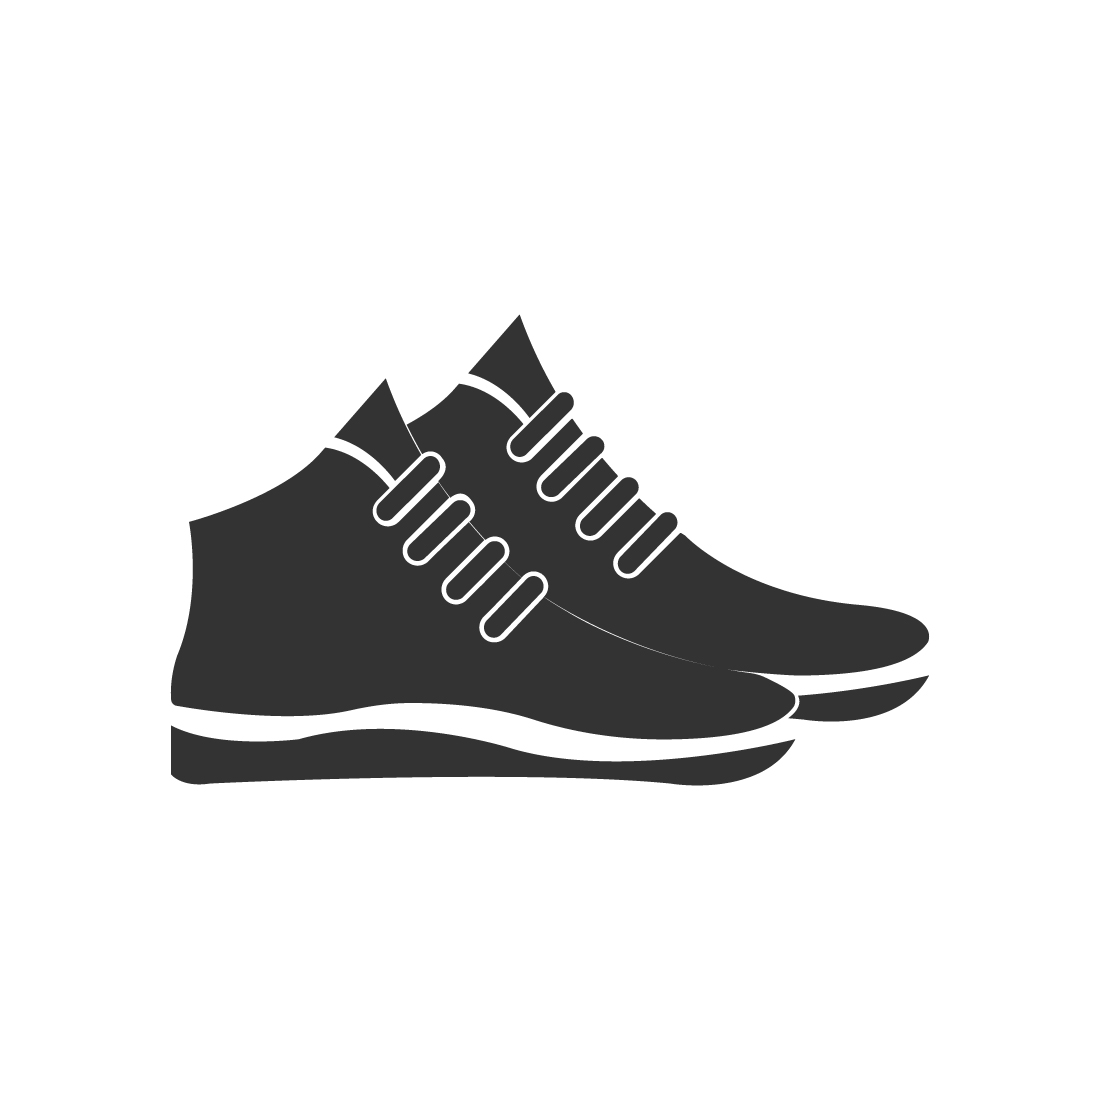 Modern Shoes icon design template vector images Man Shoes logo best quality preview image.